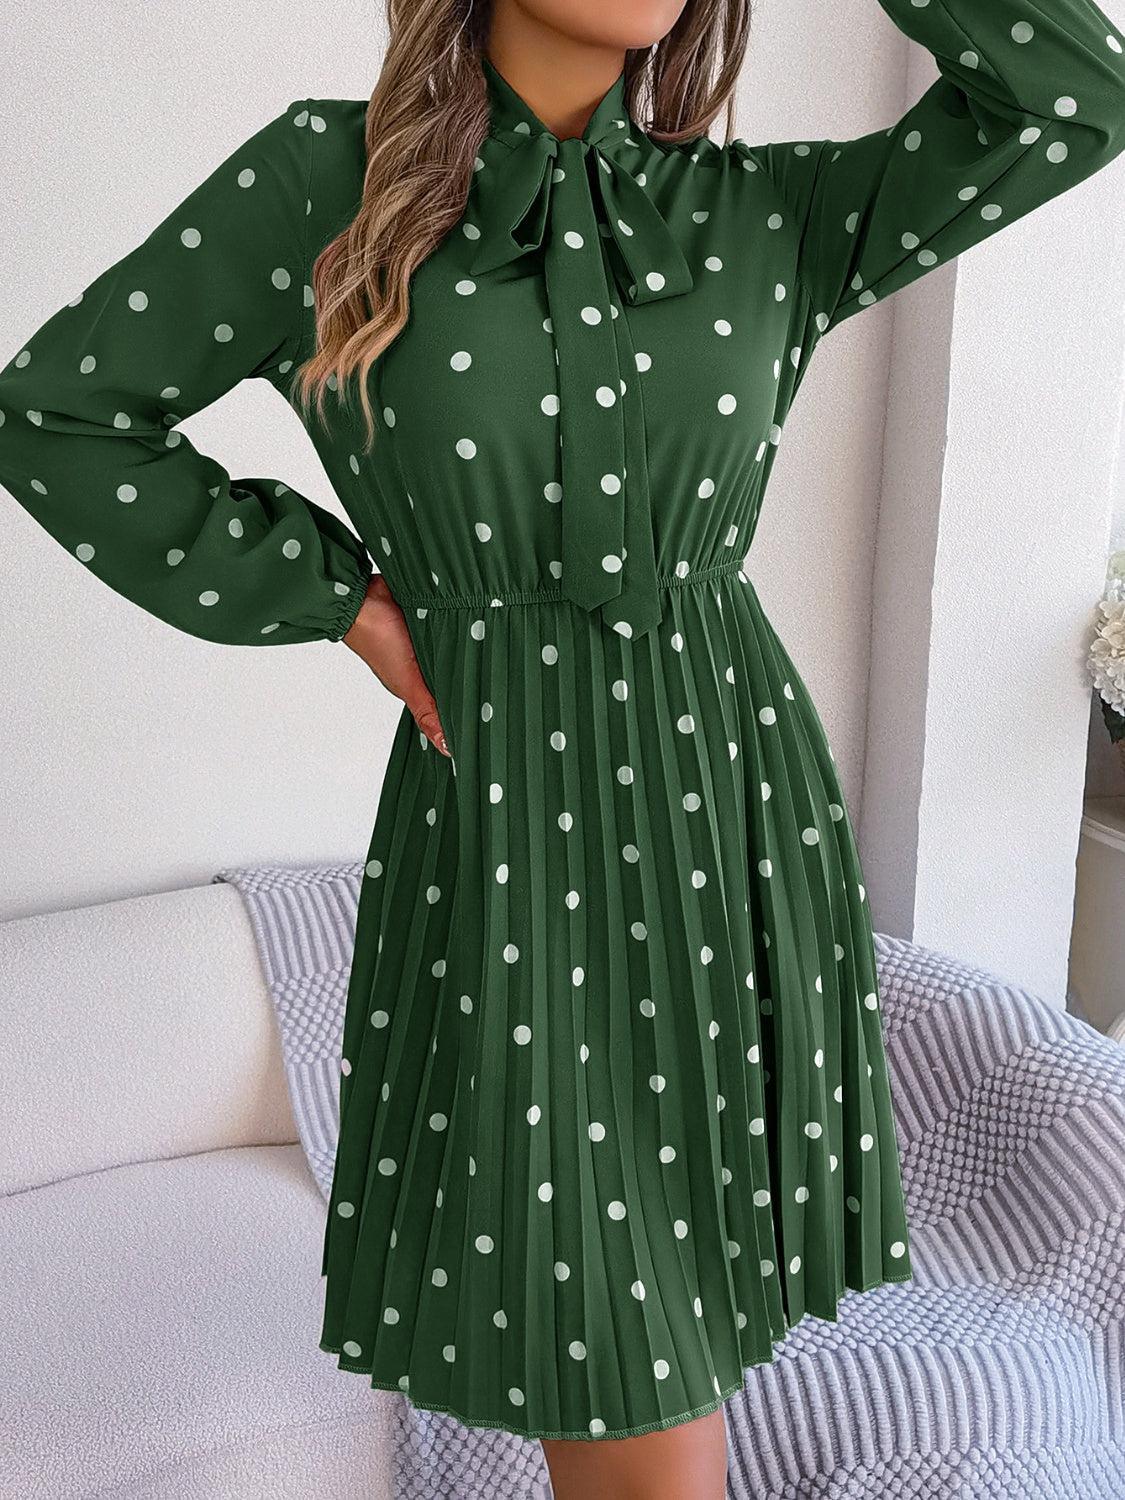 a woman wearing a green dress with white polka dots